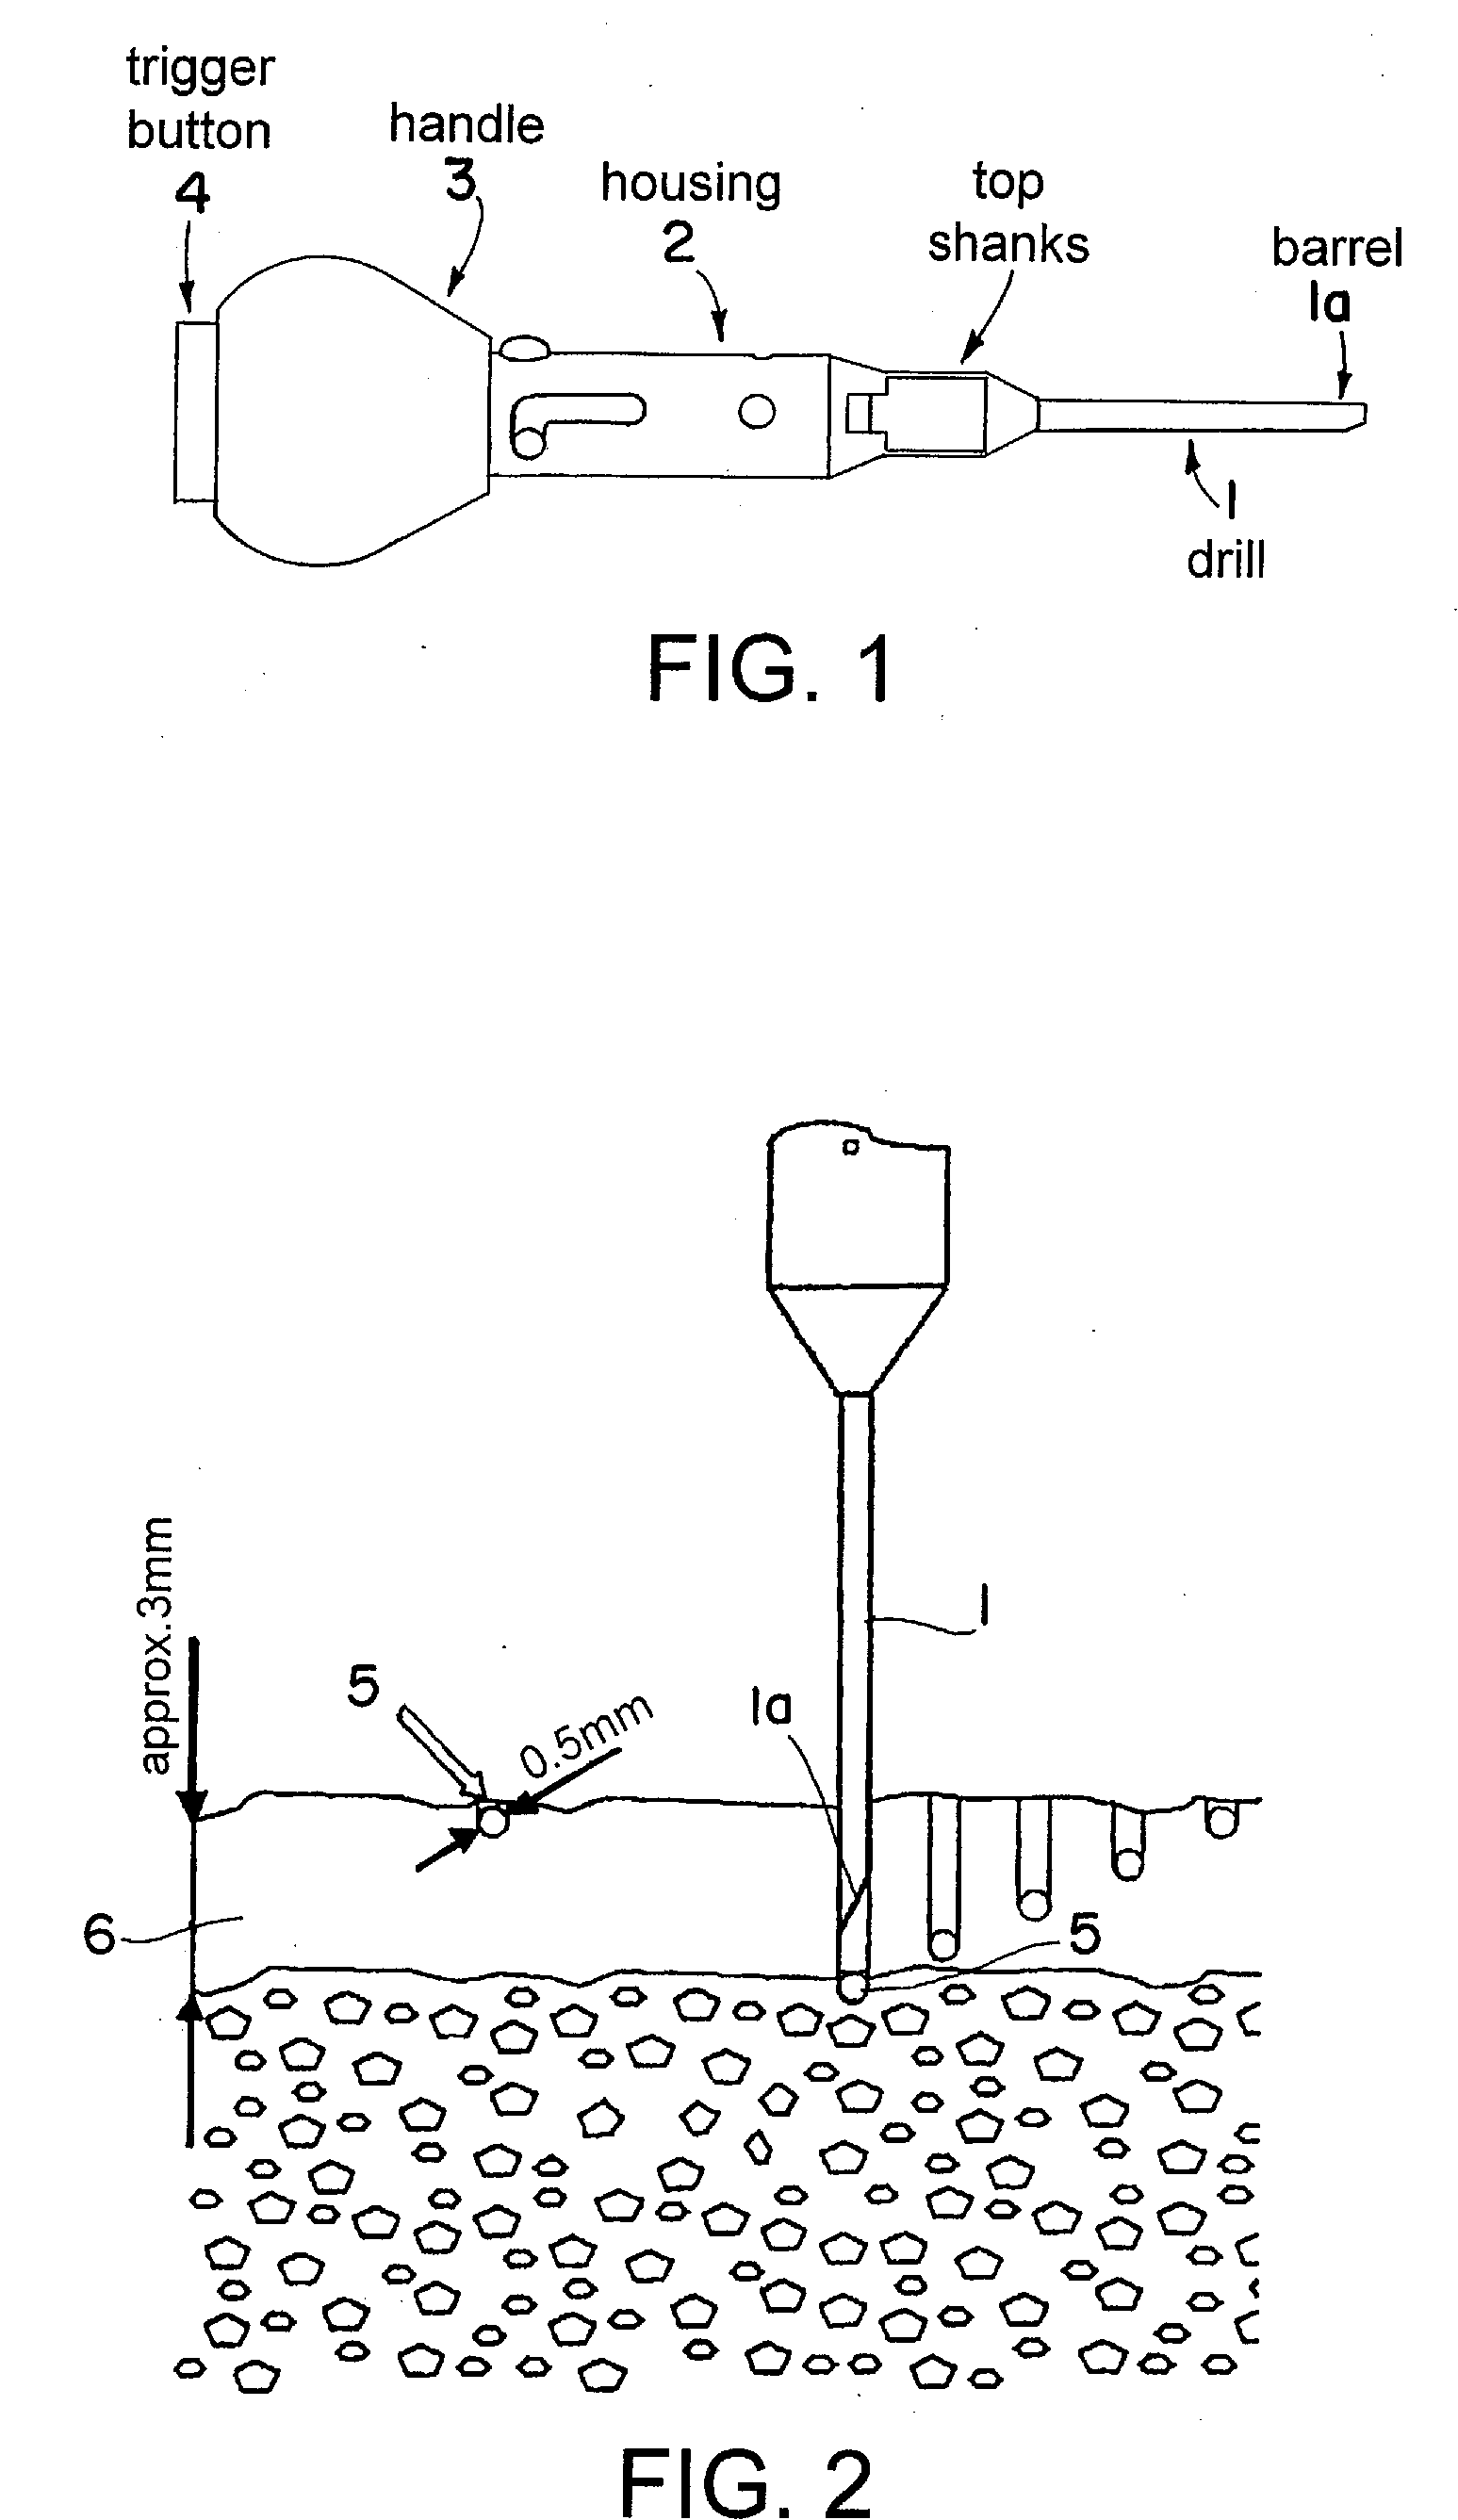 Method and device for registering an anatomical structure using markers